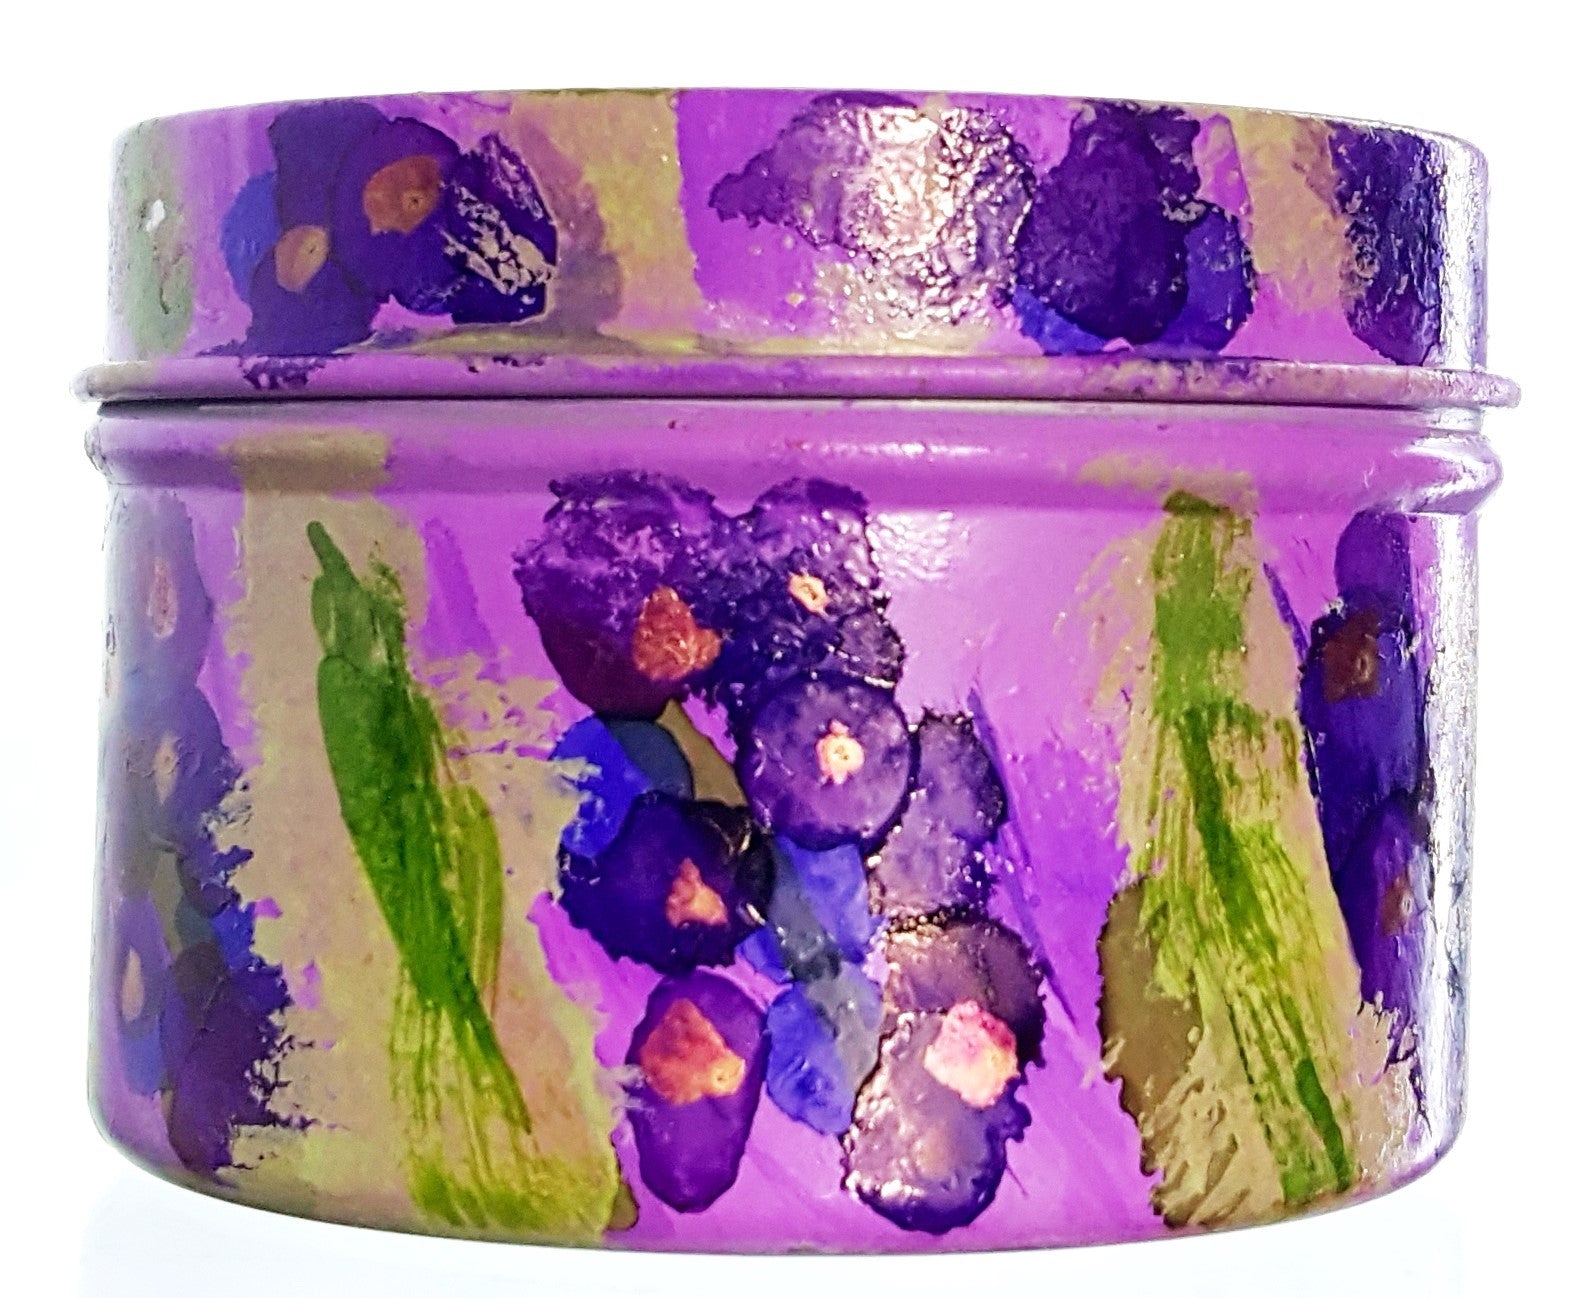 Buy Blossom to Bath Lavender Mint Handpainted Soy Wax Candle from Flowersong Soap Studio.  Enjoy one of a kind décor and fill the air with a charming fragrance that lasts for hours  A cheerfully relaxing combination of lavender and peppermint.